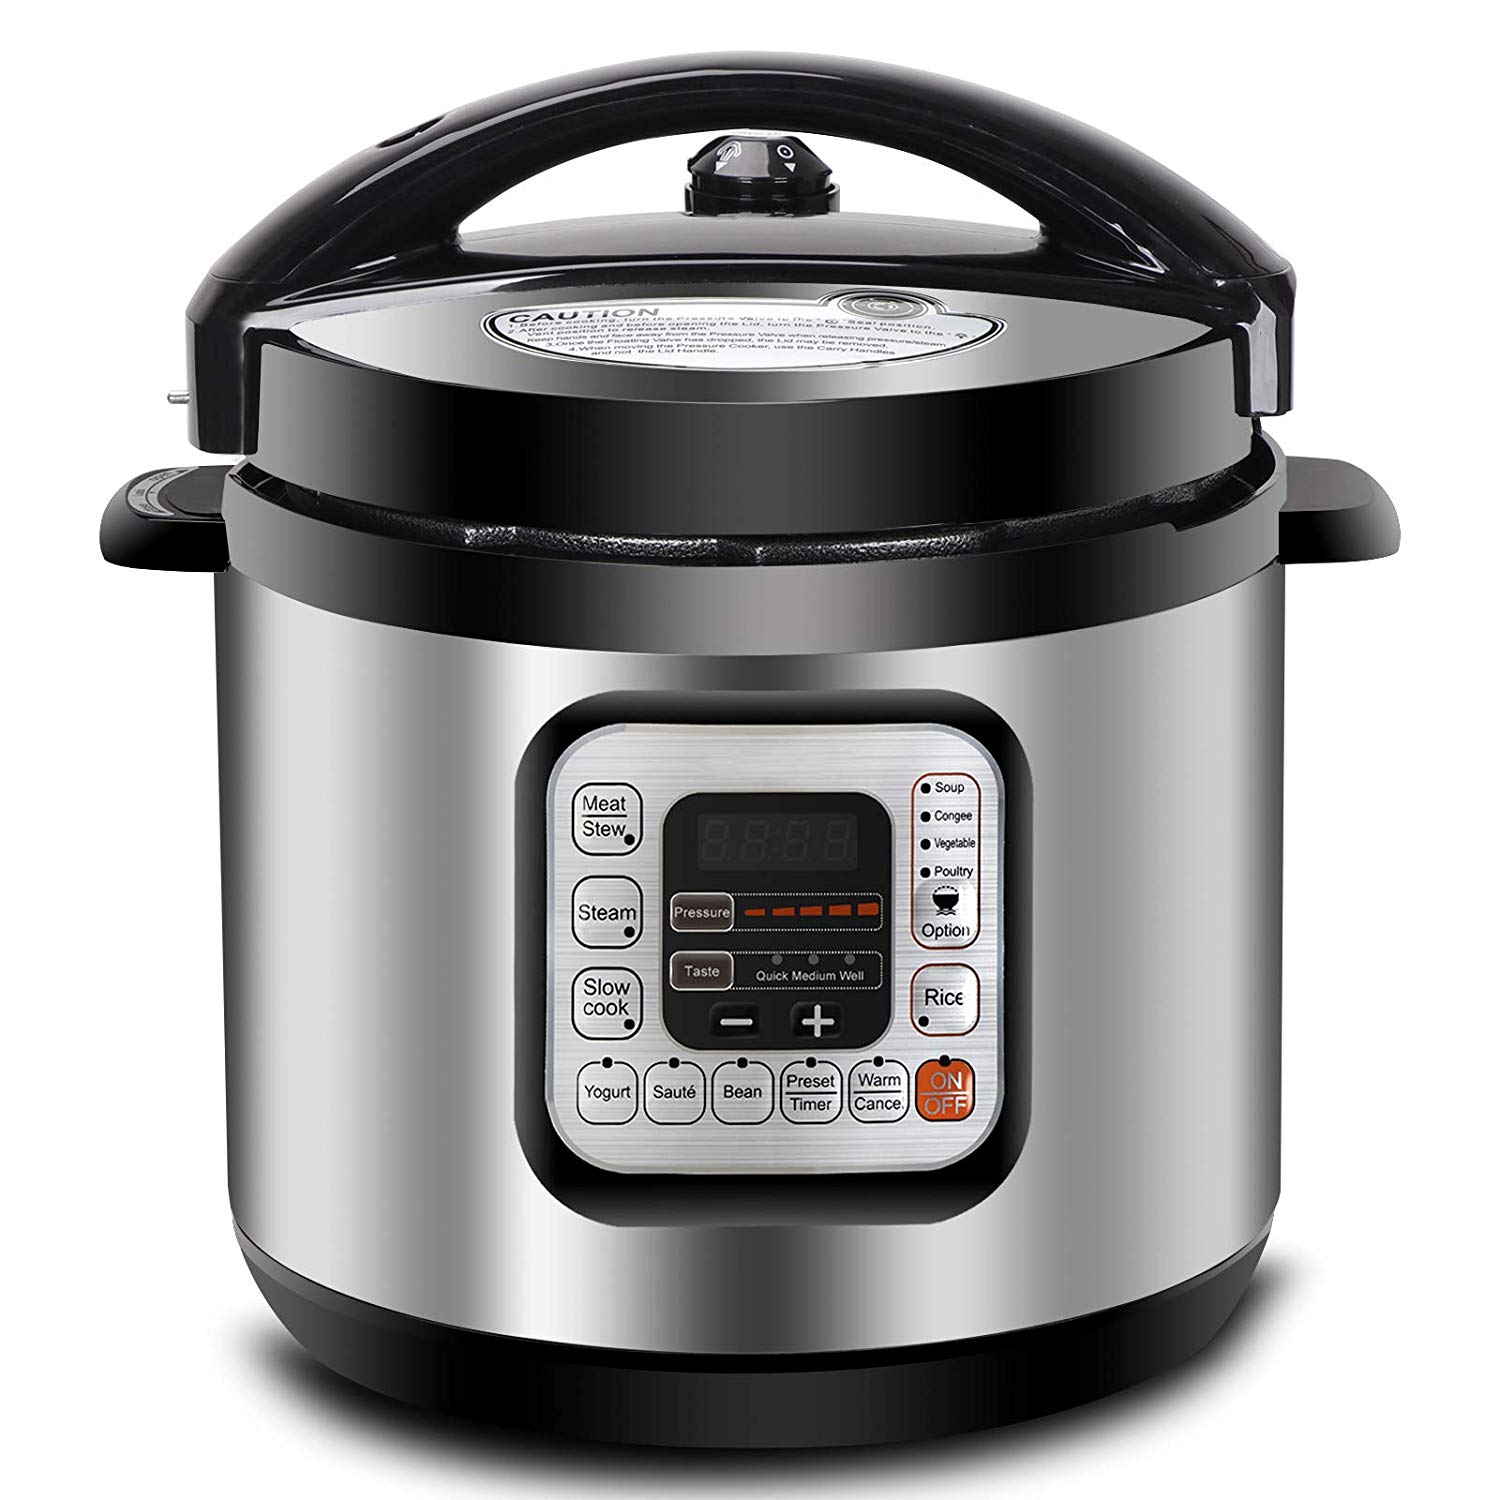 Instant Pot Duo 7-In-1 Electric Pressure Cooker Review: Pros and Cons -  Delishably